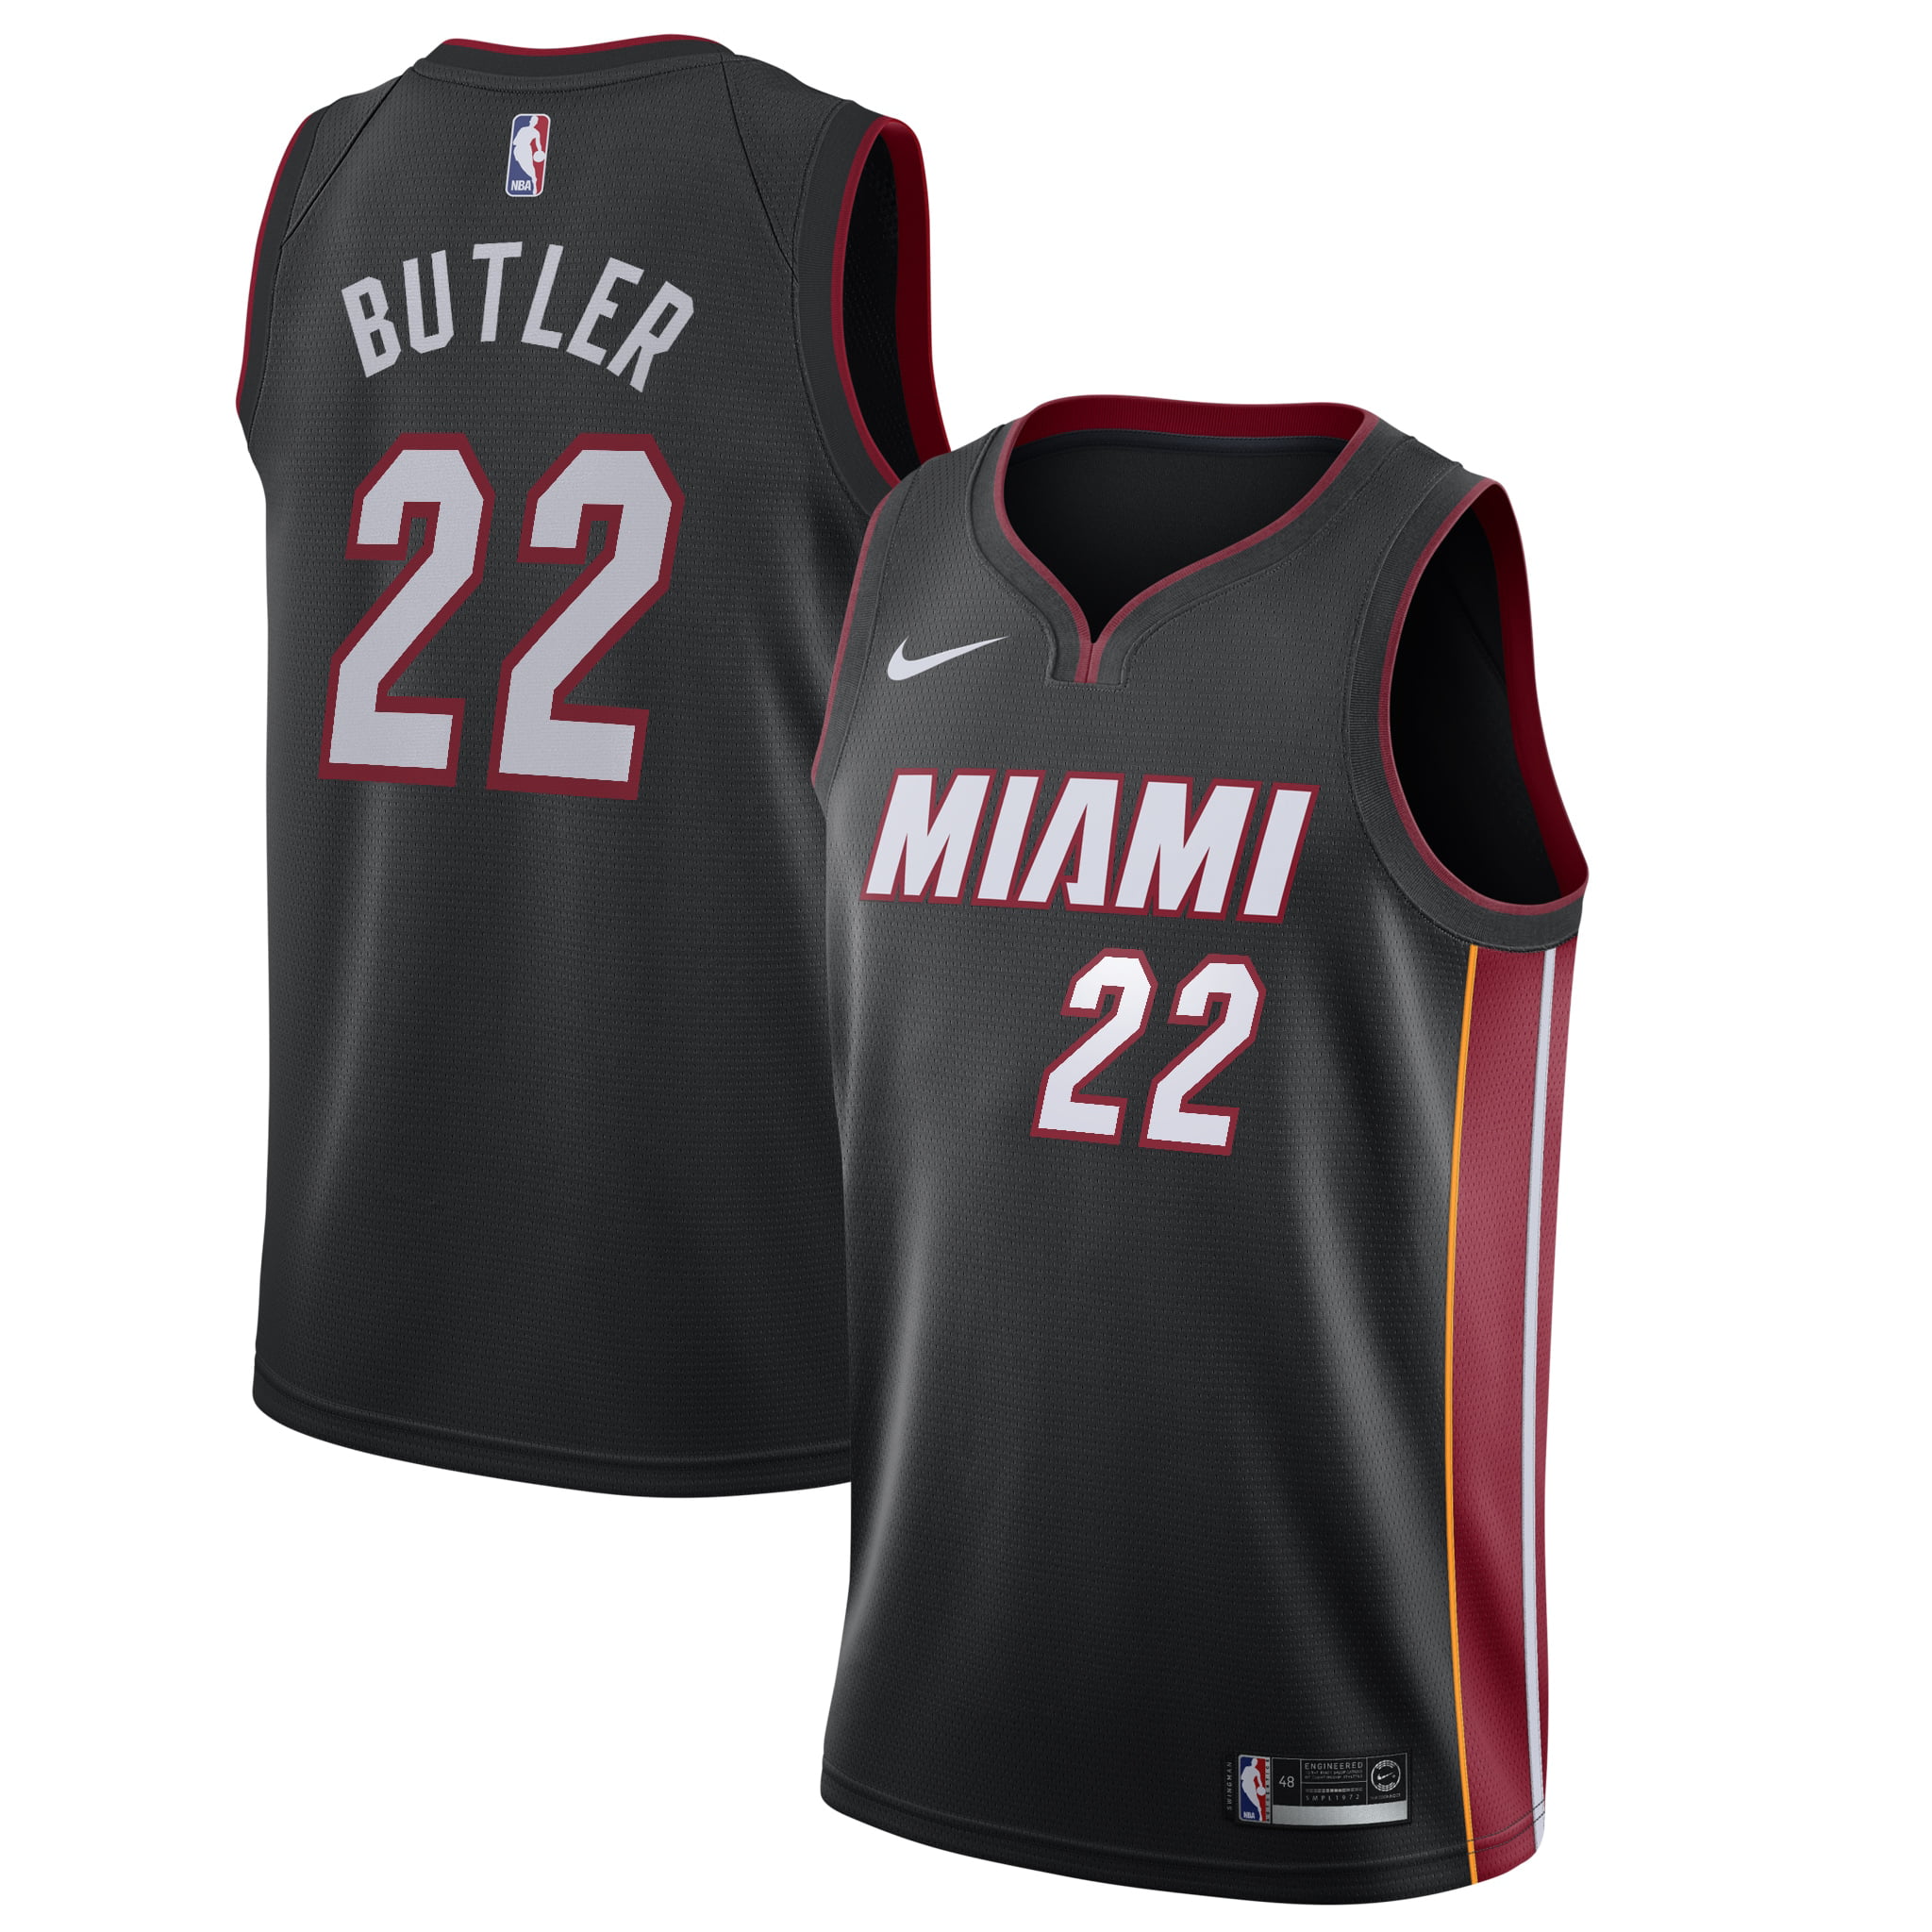 jimmy butler gray sixers jersey